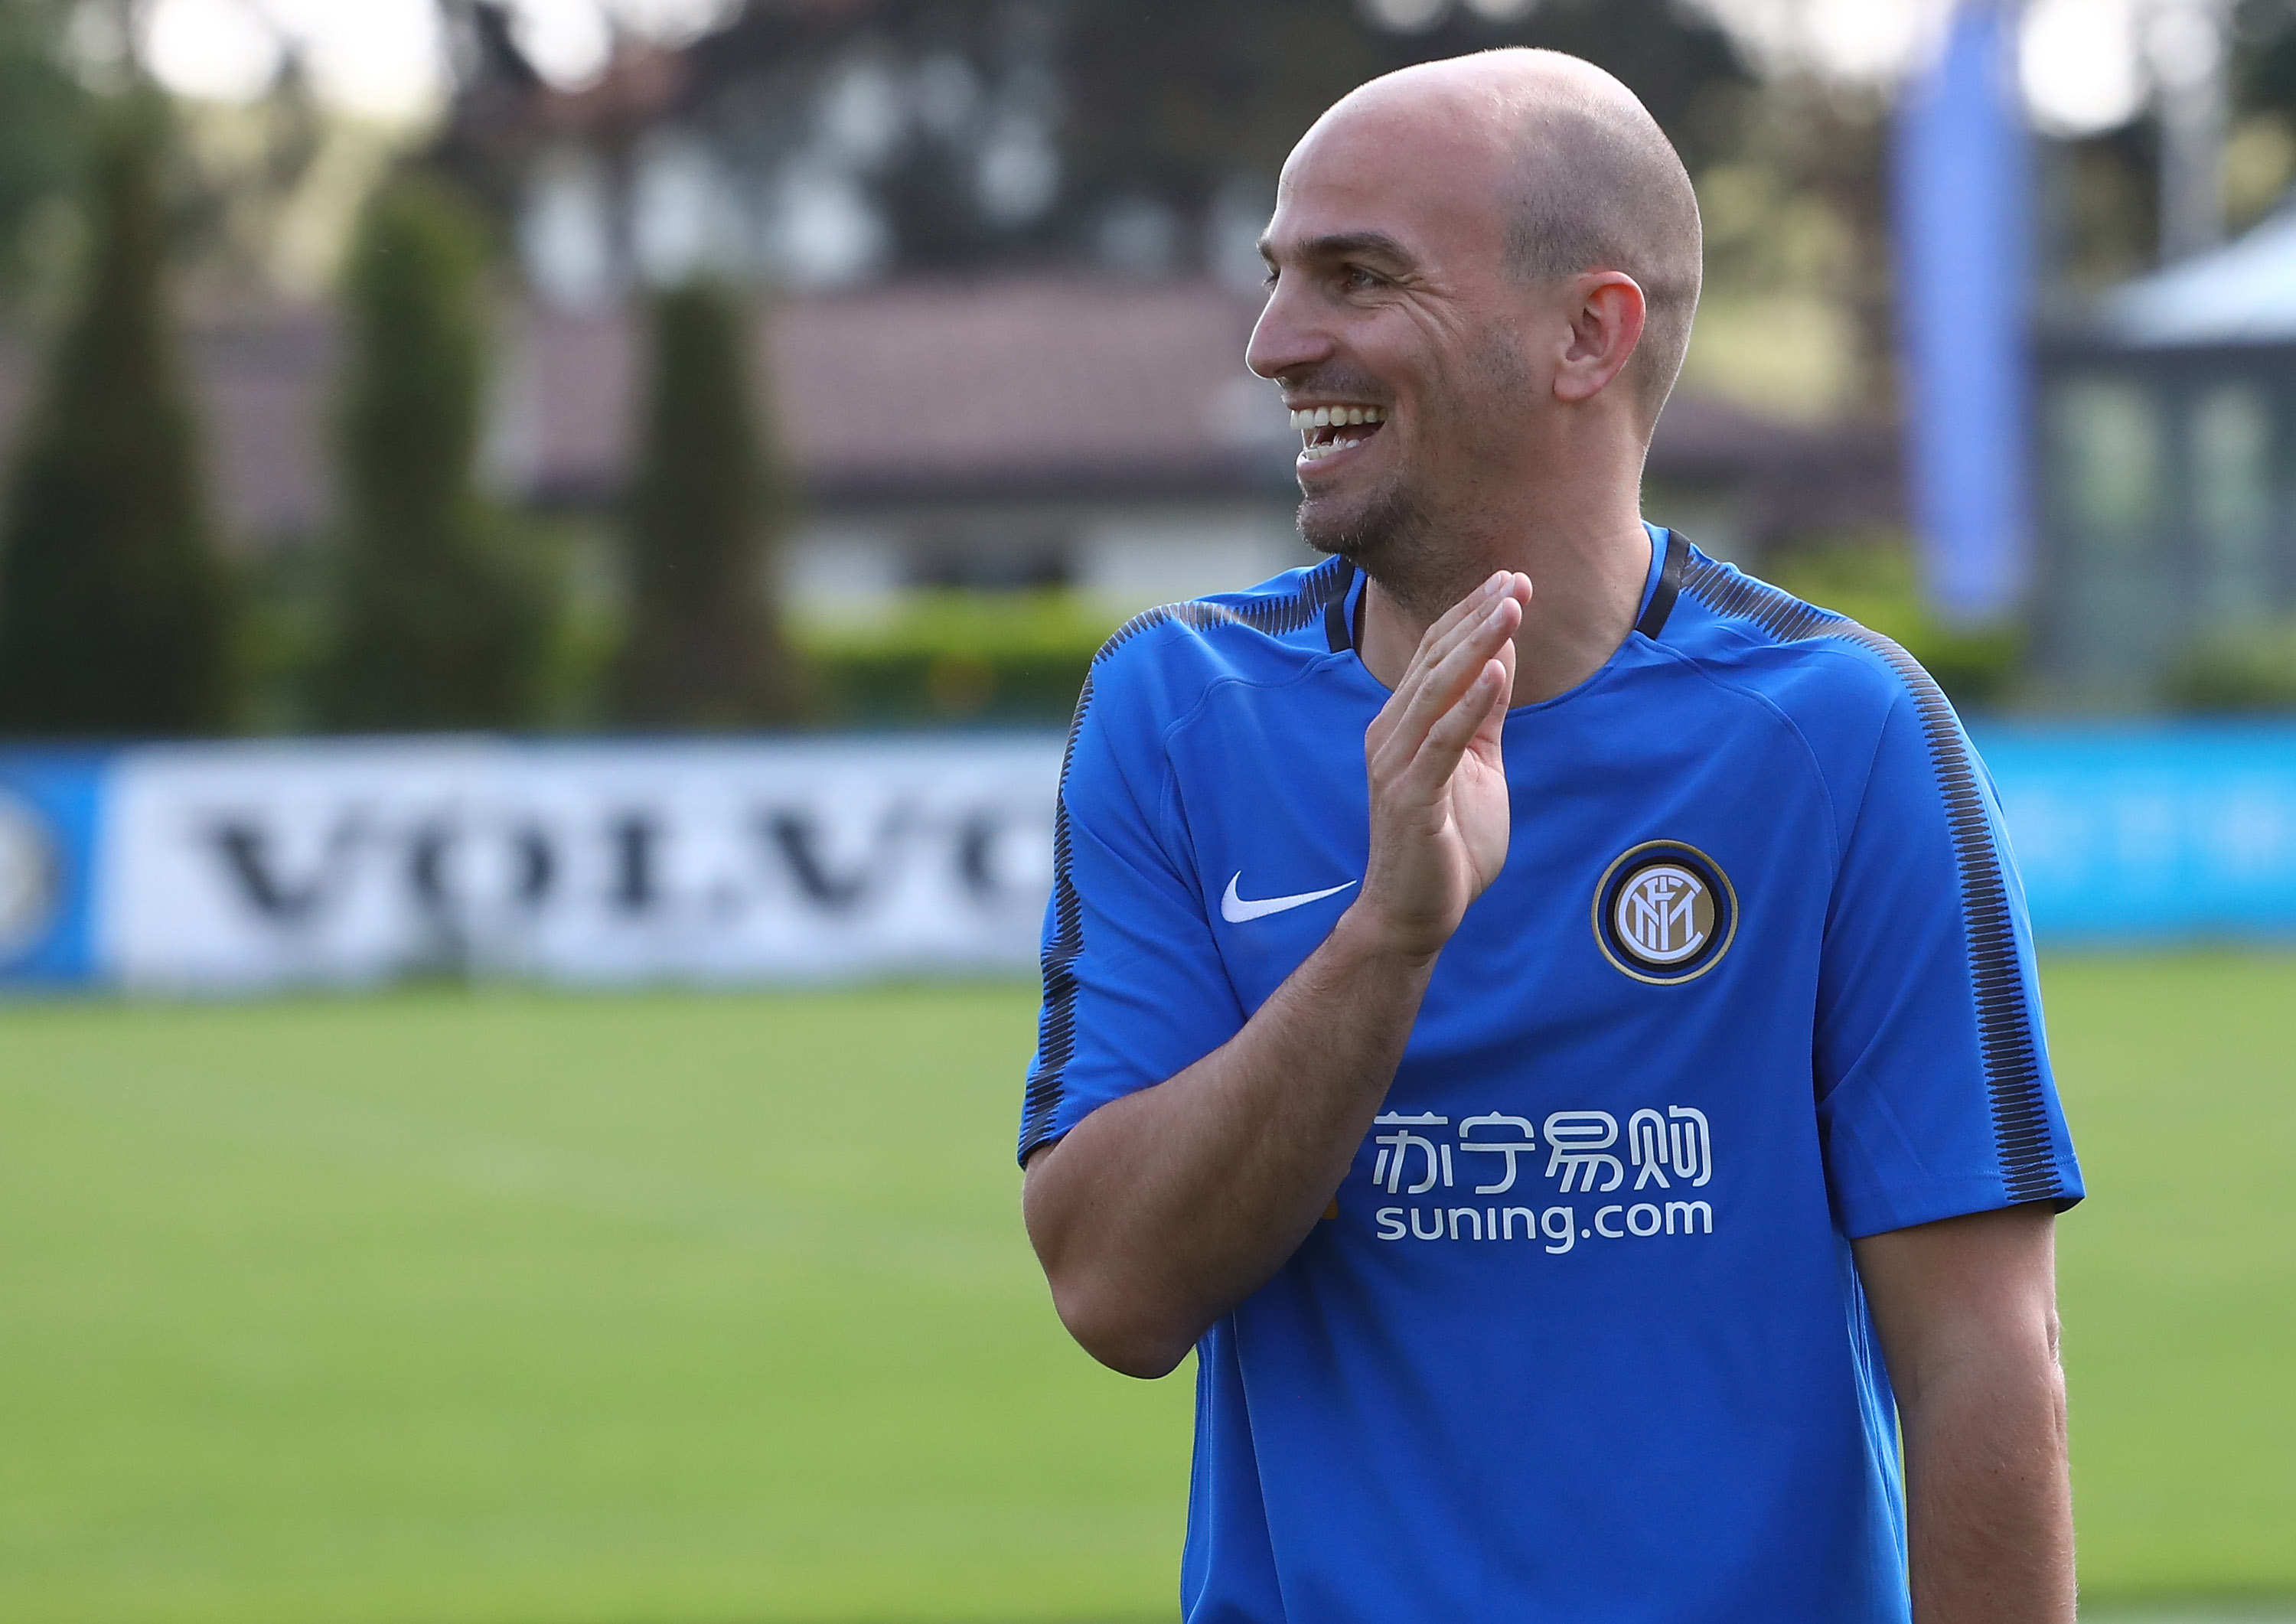 COMO, ITALY - MAY 10:  Esteban Cambiasso of Inter Forever looks on during the FC Internazionale training session at the club's training ground Suning Training Center in memory of Angelo Moratti on May 10, 2018 in Como, Italy.  (Photo by Marco Luzzani - Inter/Inter via Getty Images)